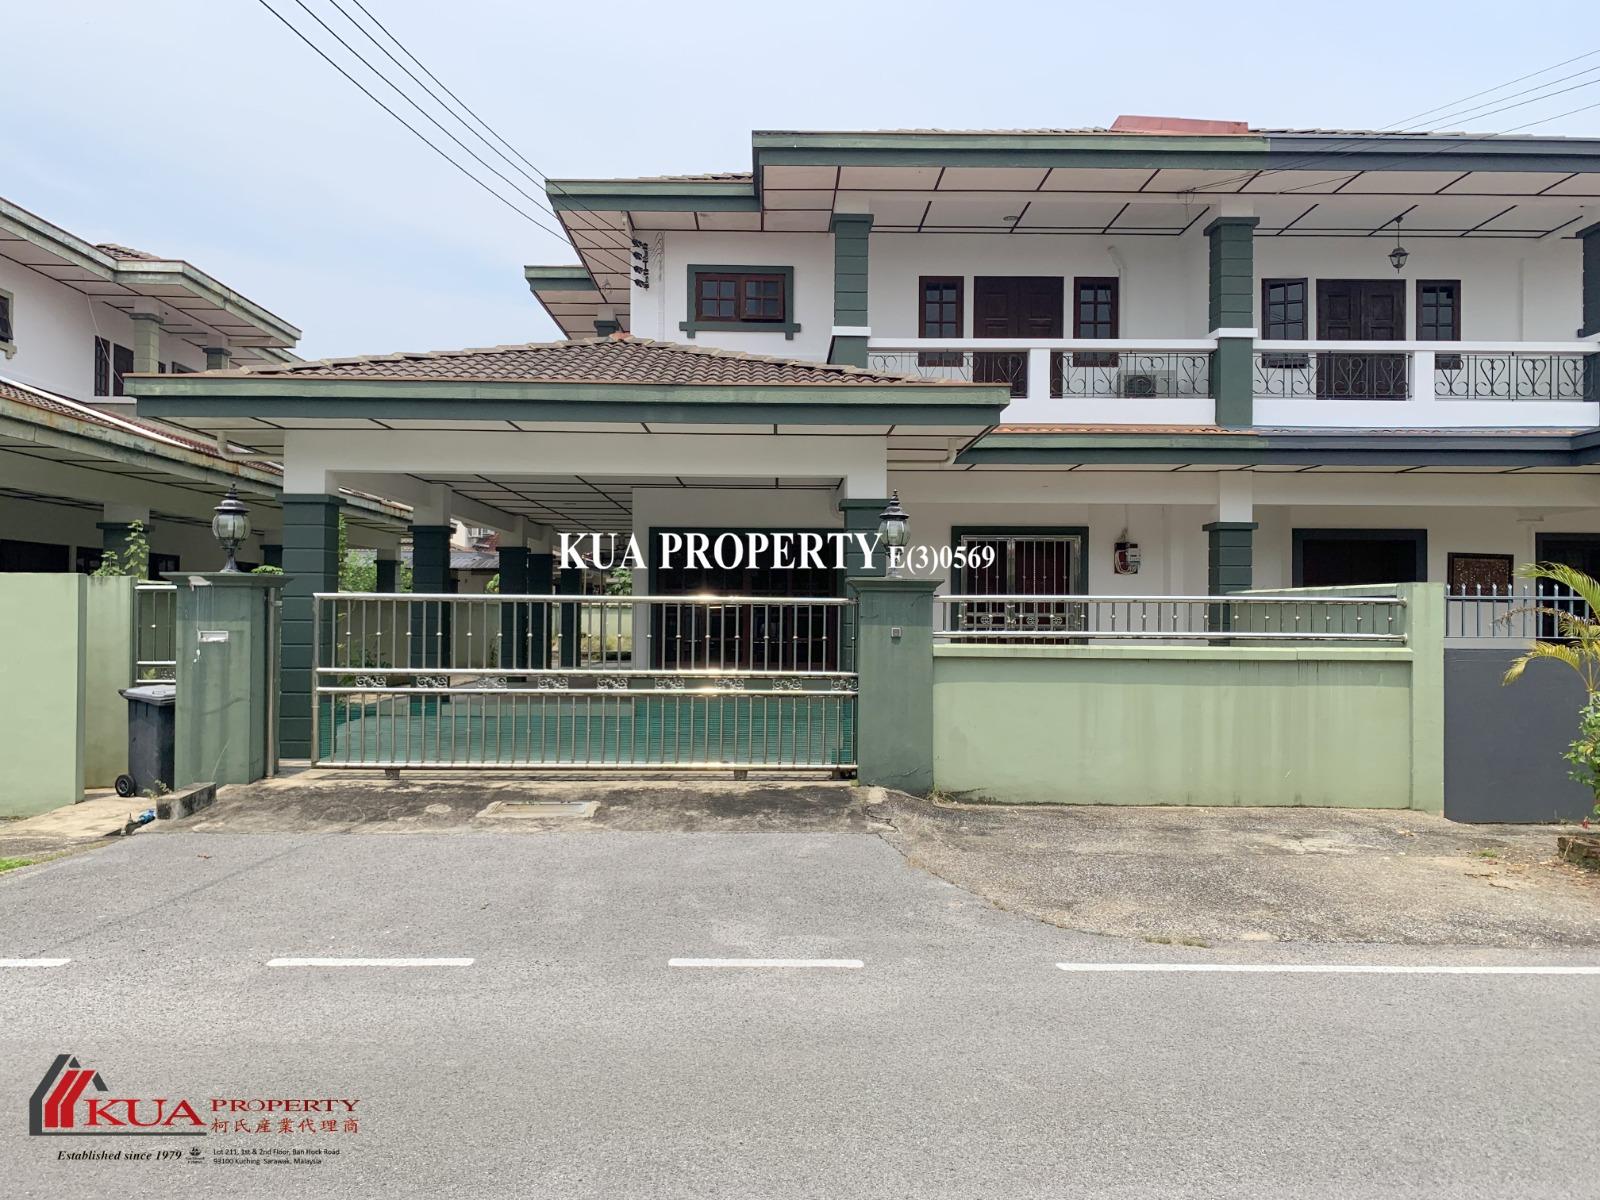 Double Storey Semi-Detached House For Rent! Located at Jalan Song